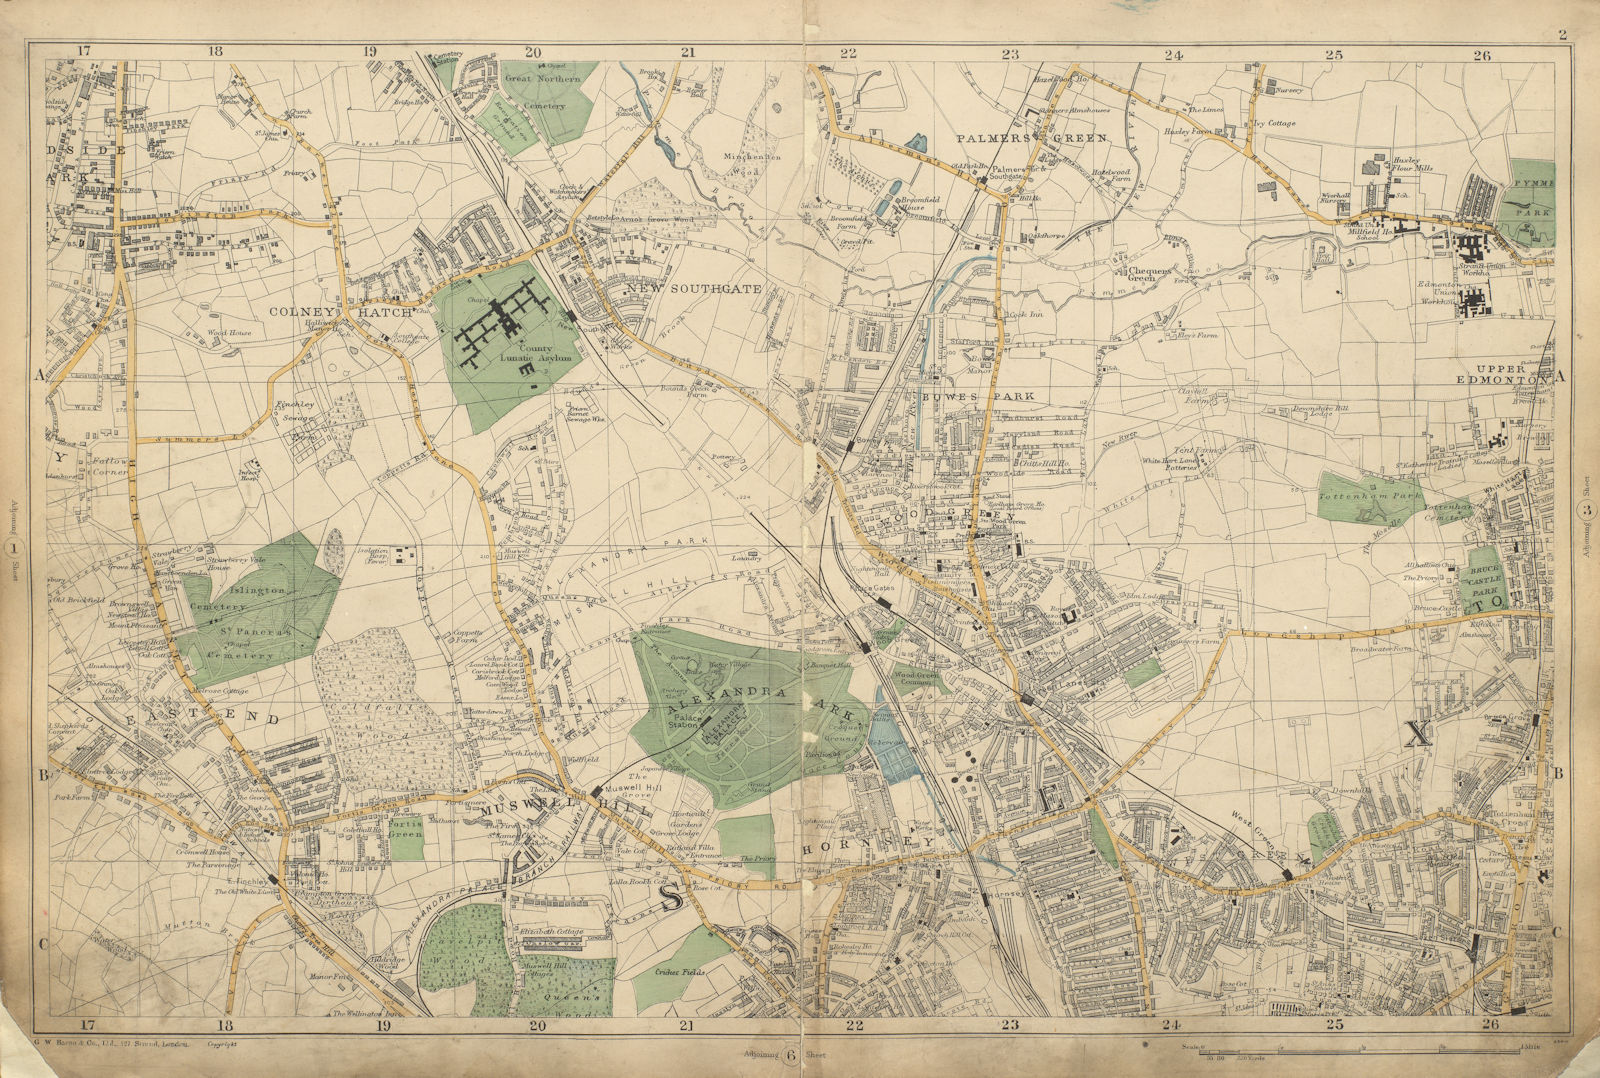 FRIERN BARNET/HORNSEY Palmers/Wood Green Muswell Hill Southgate BACON 1900 map